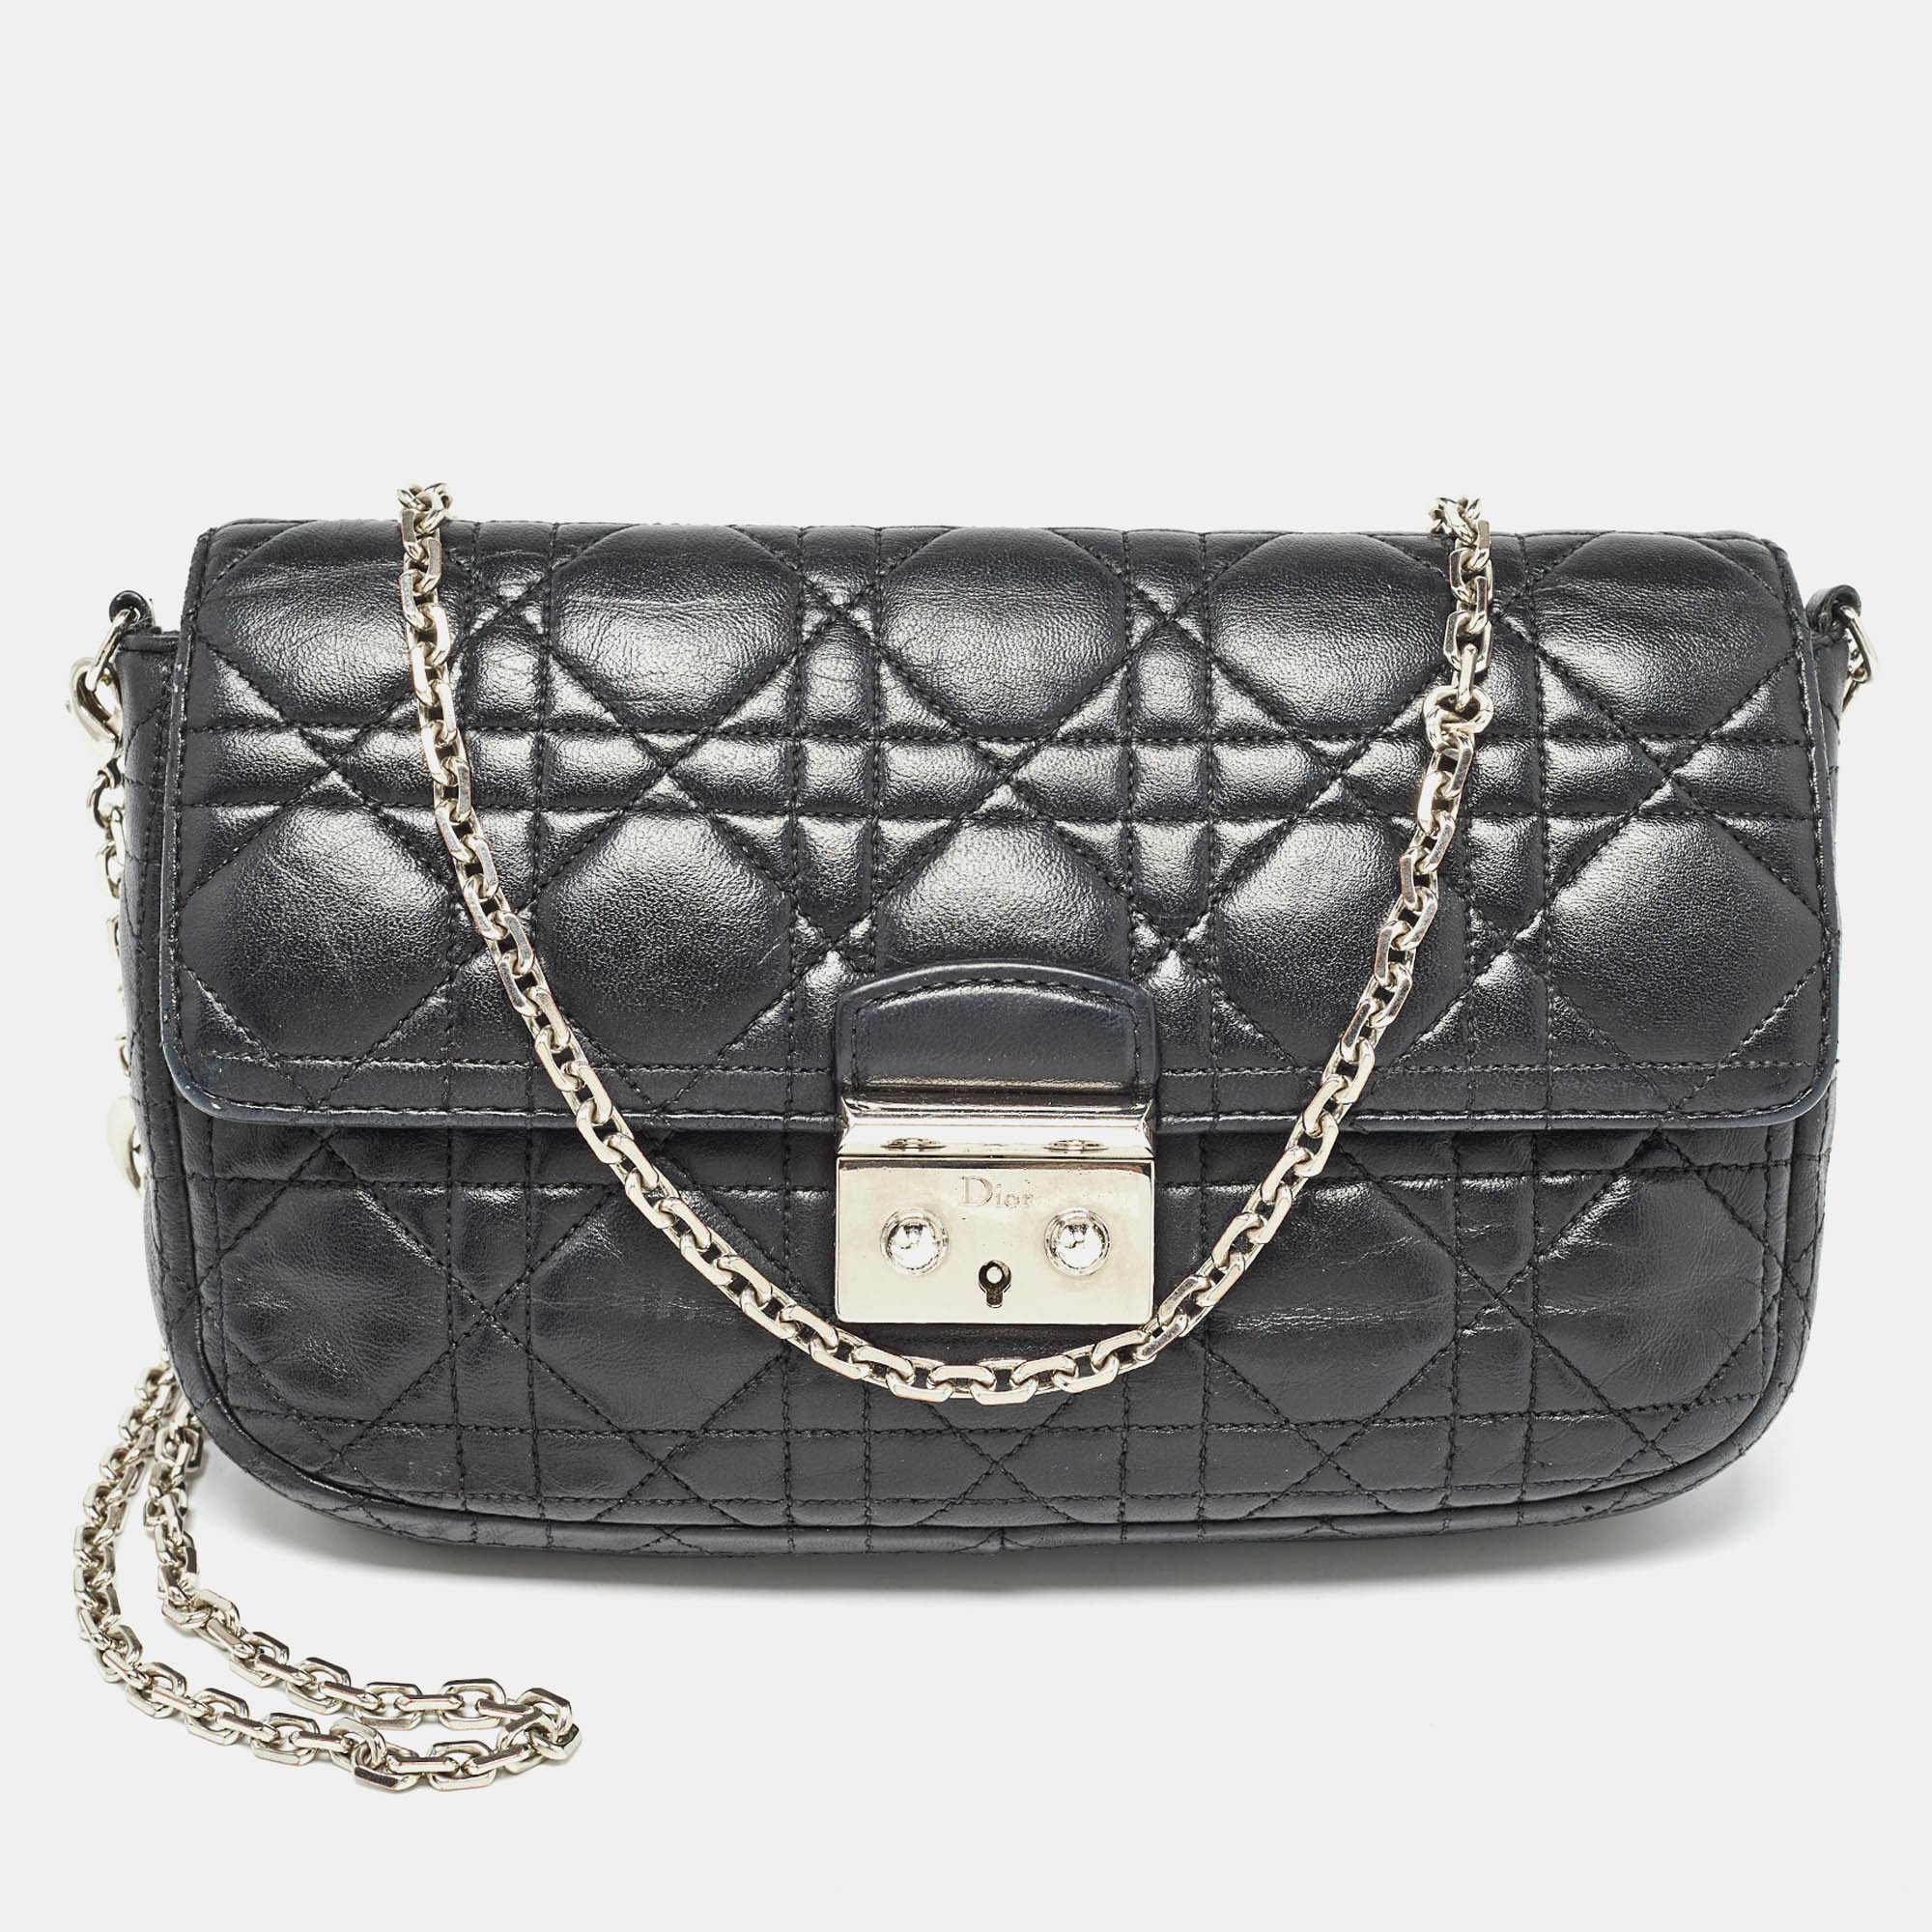 Dior black cannage leather small miss dior flap bag